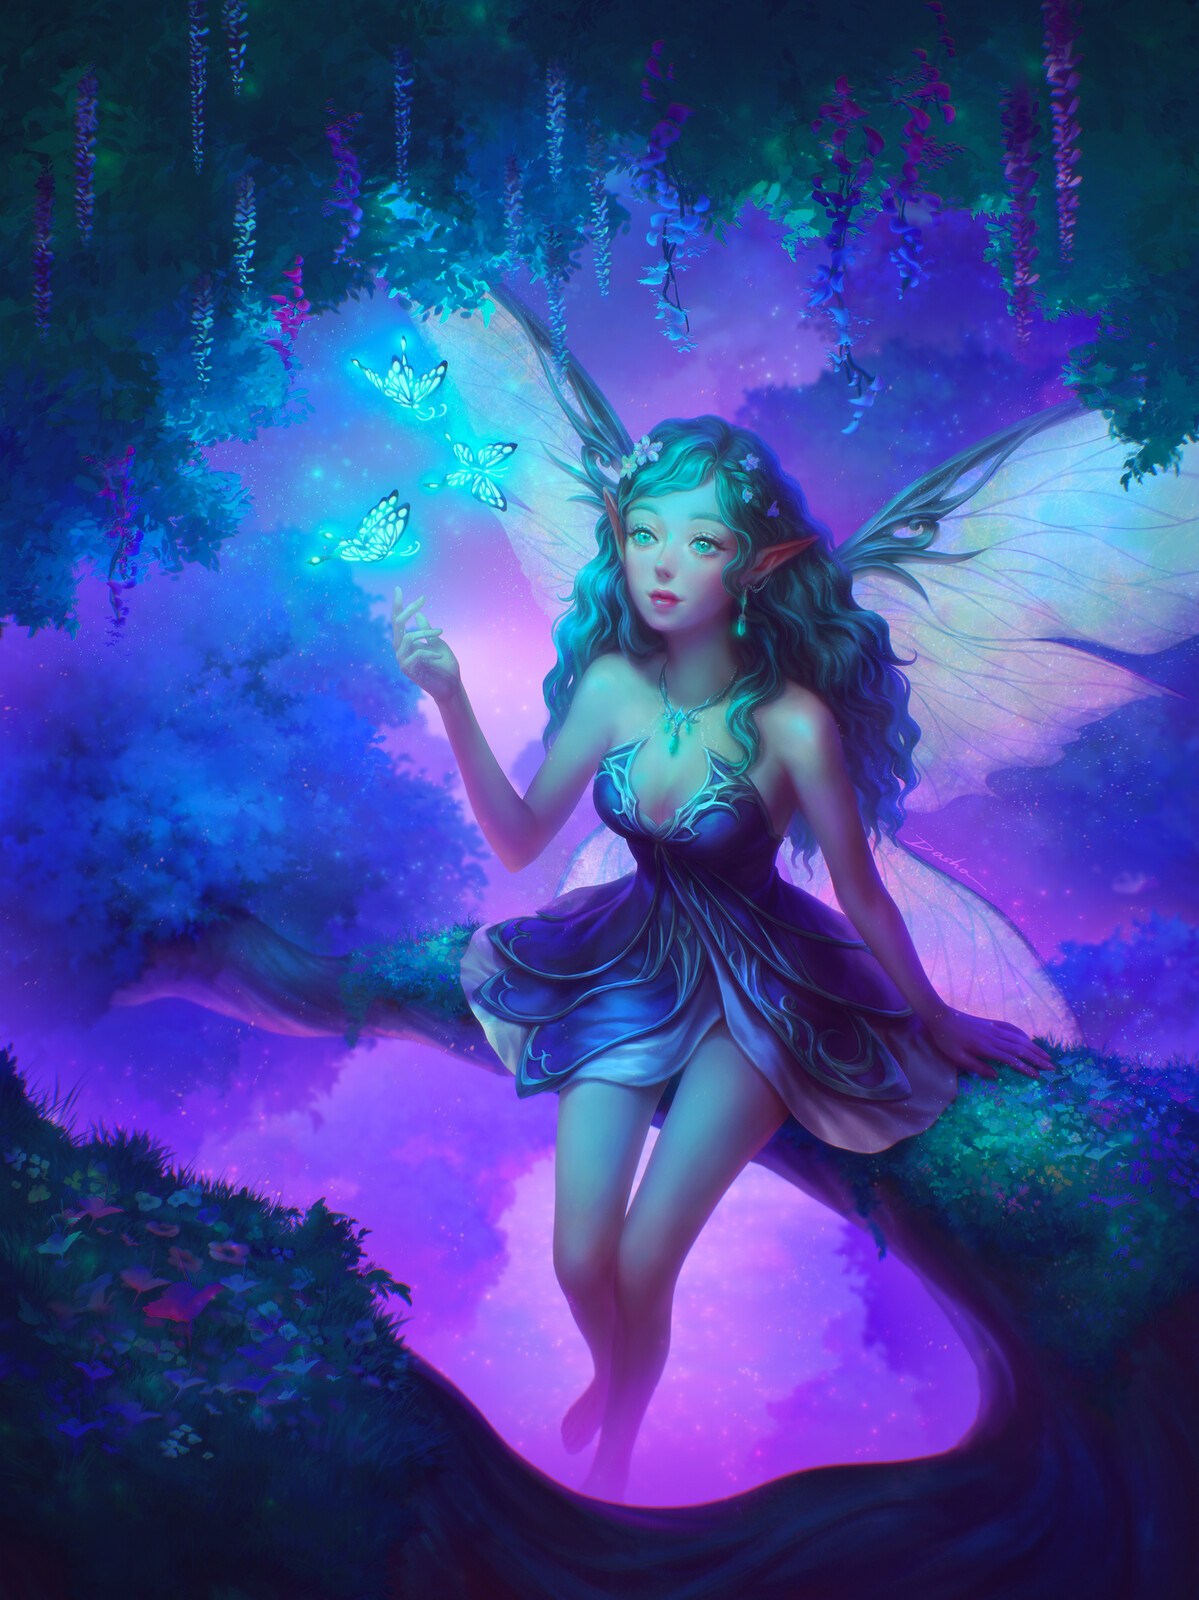 Fairy in Forest